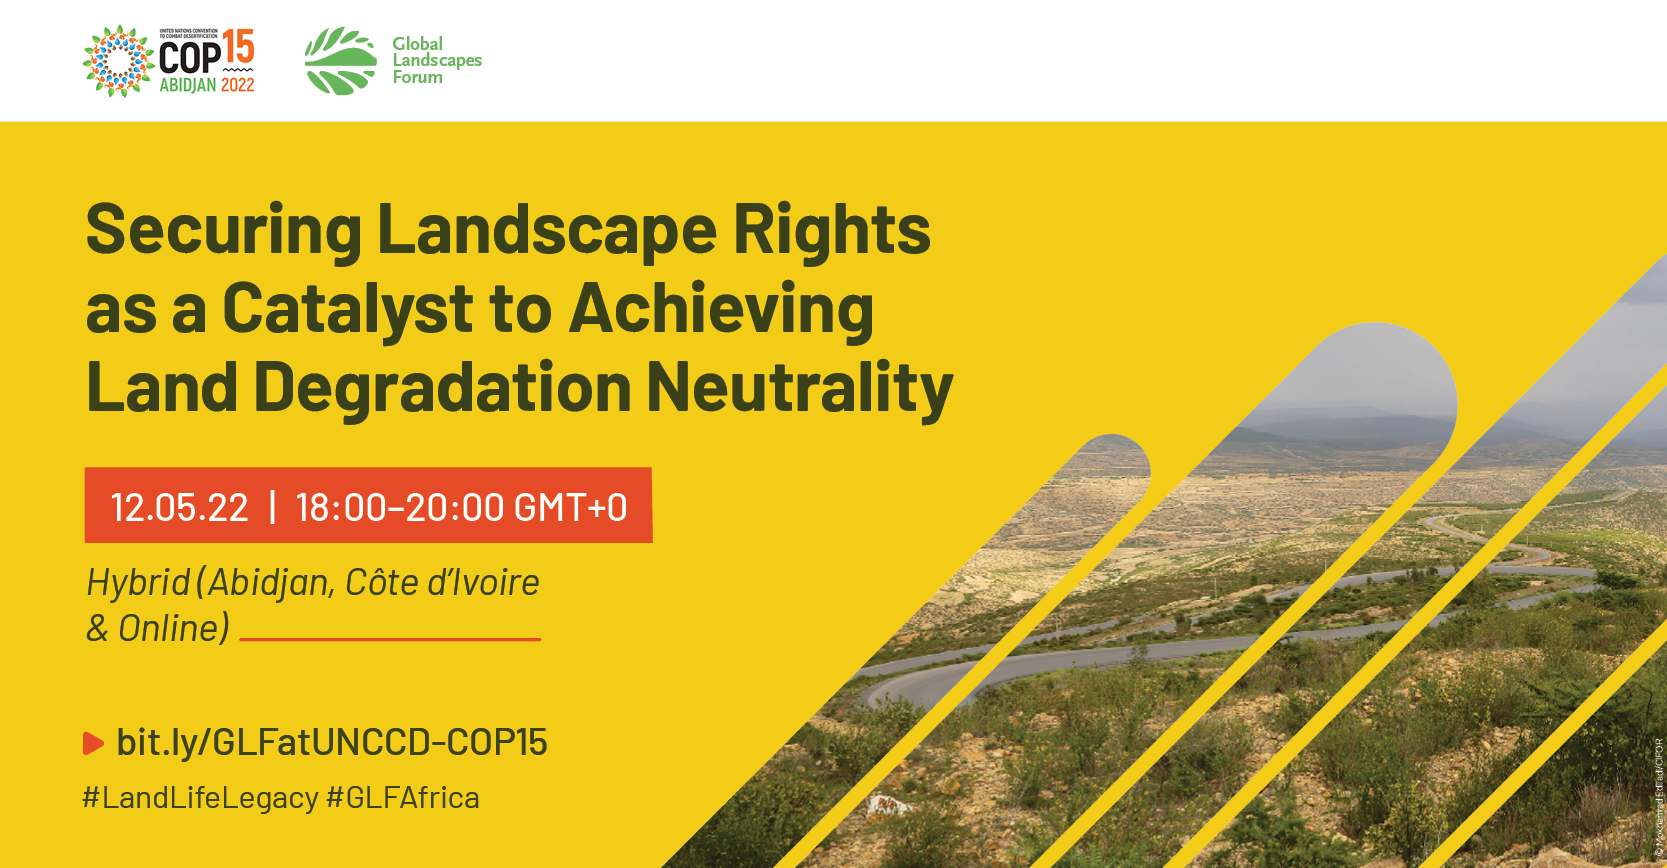 Securing Landscape Rights as a Catalyst to Achieving Land Degradation Neutrality